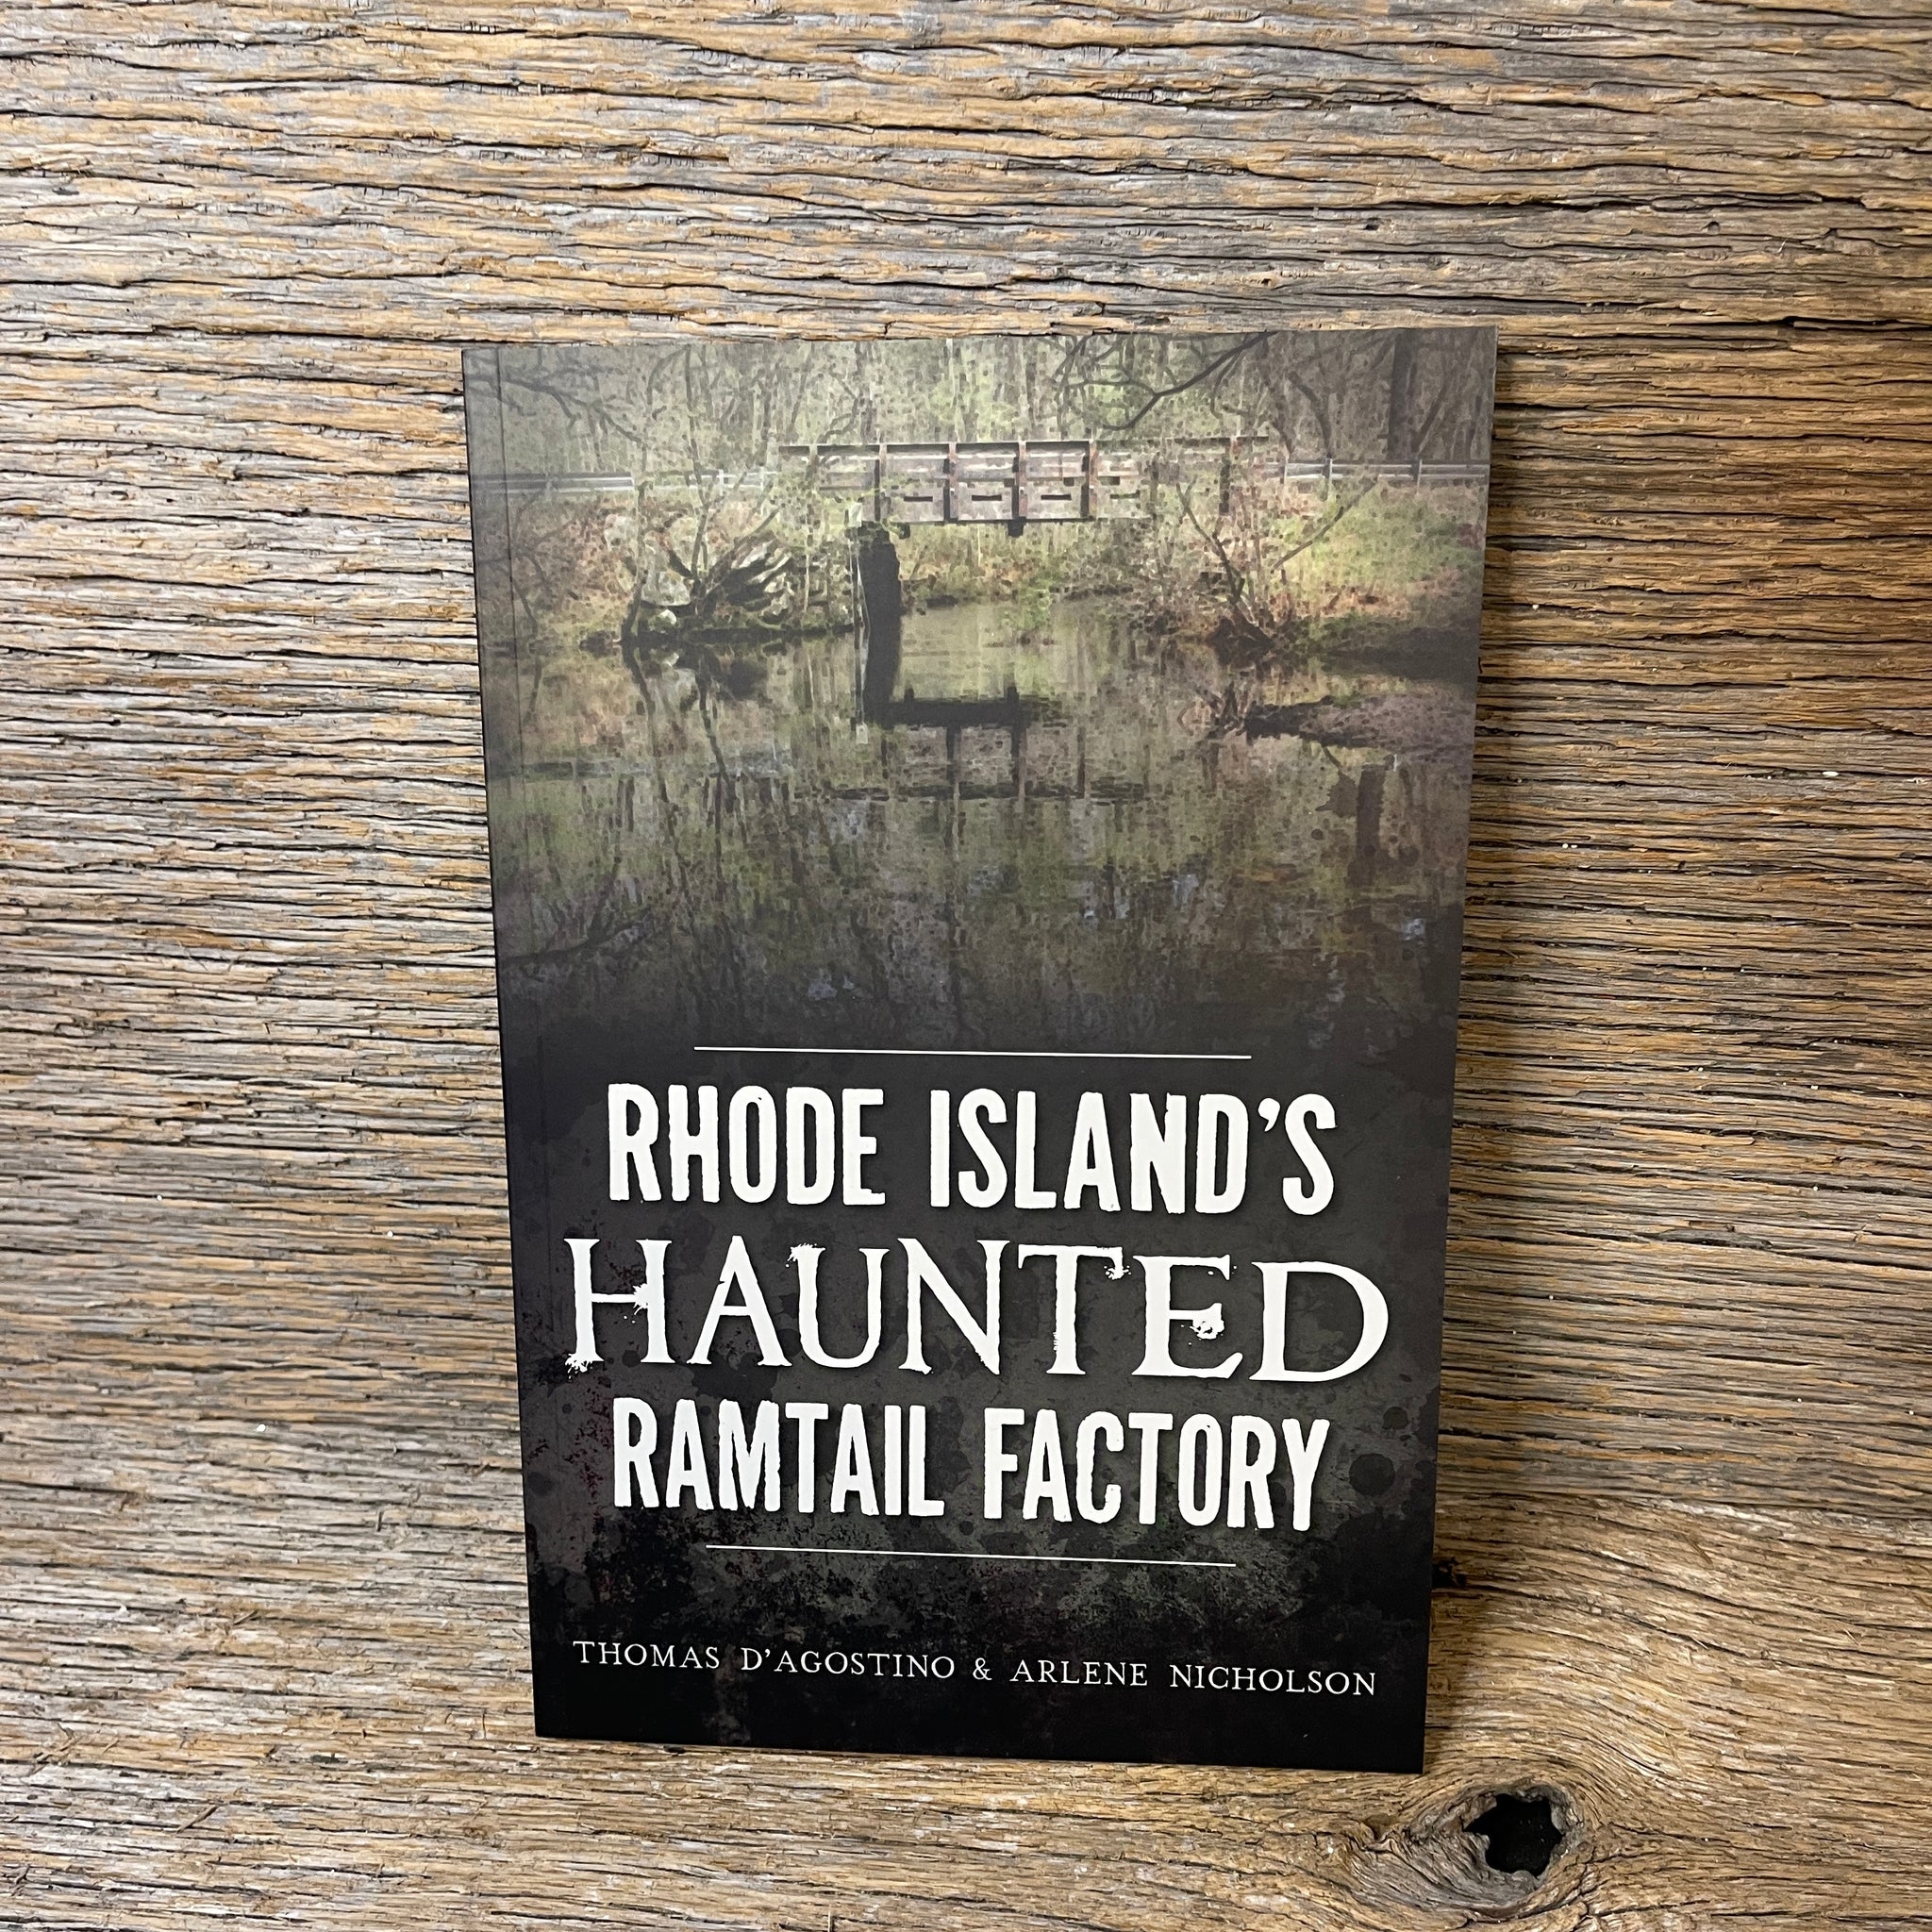 Rhode Island's Haunted Ramtail Factory by Thomas D'Agostino and